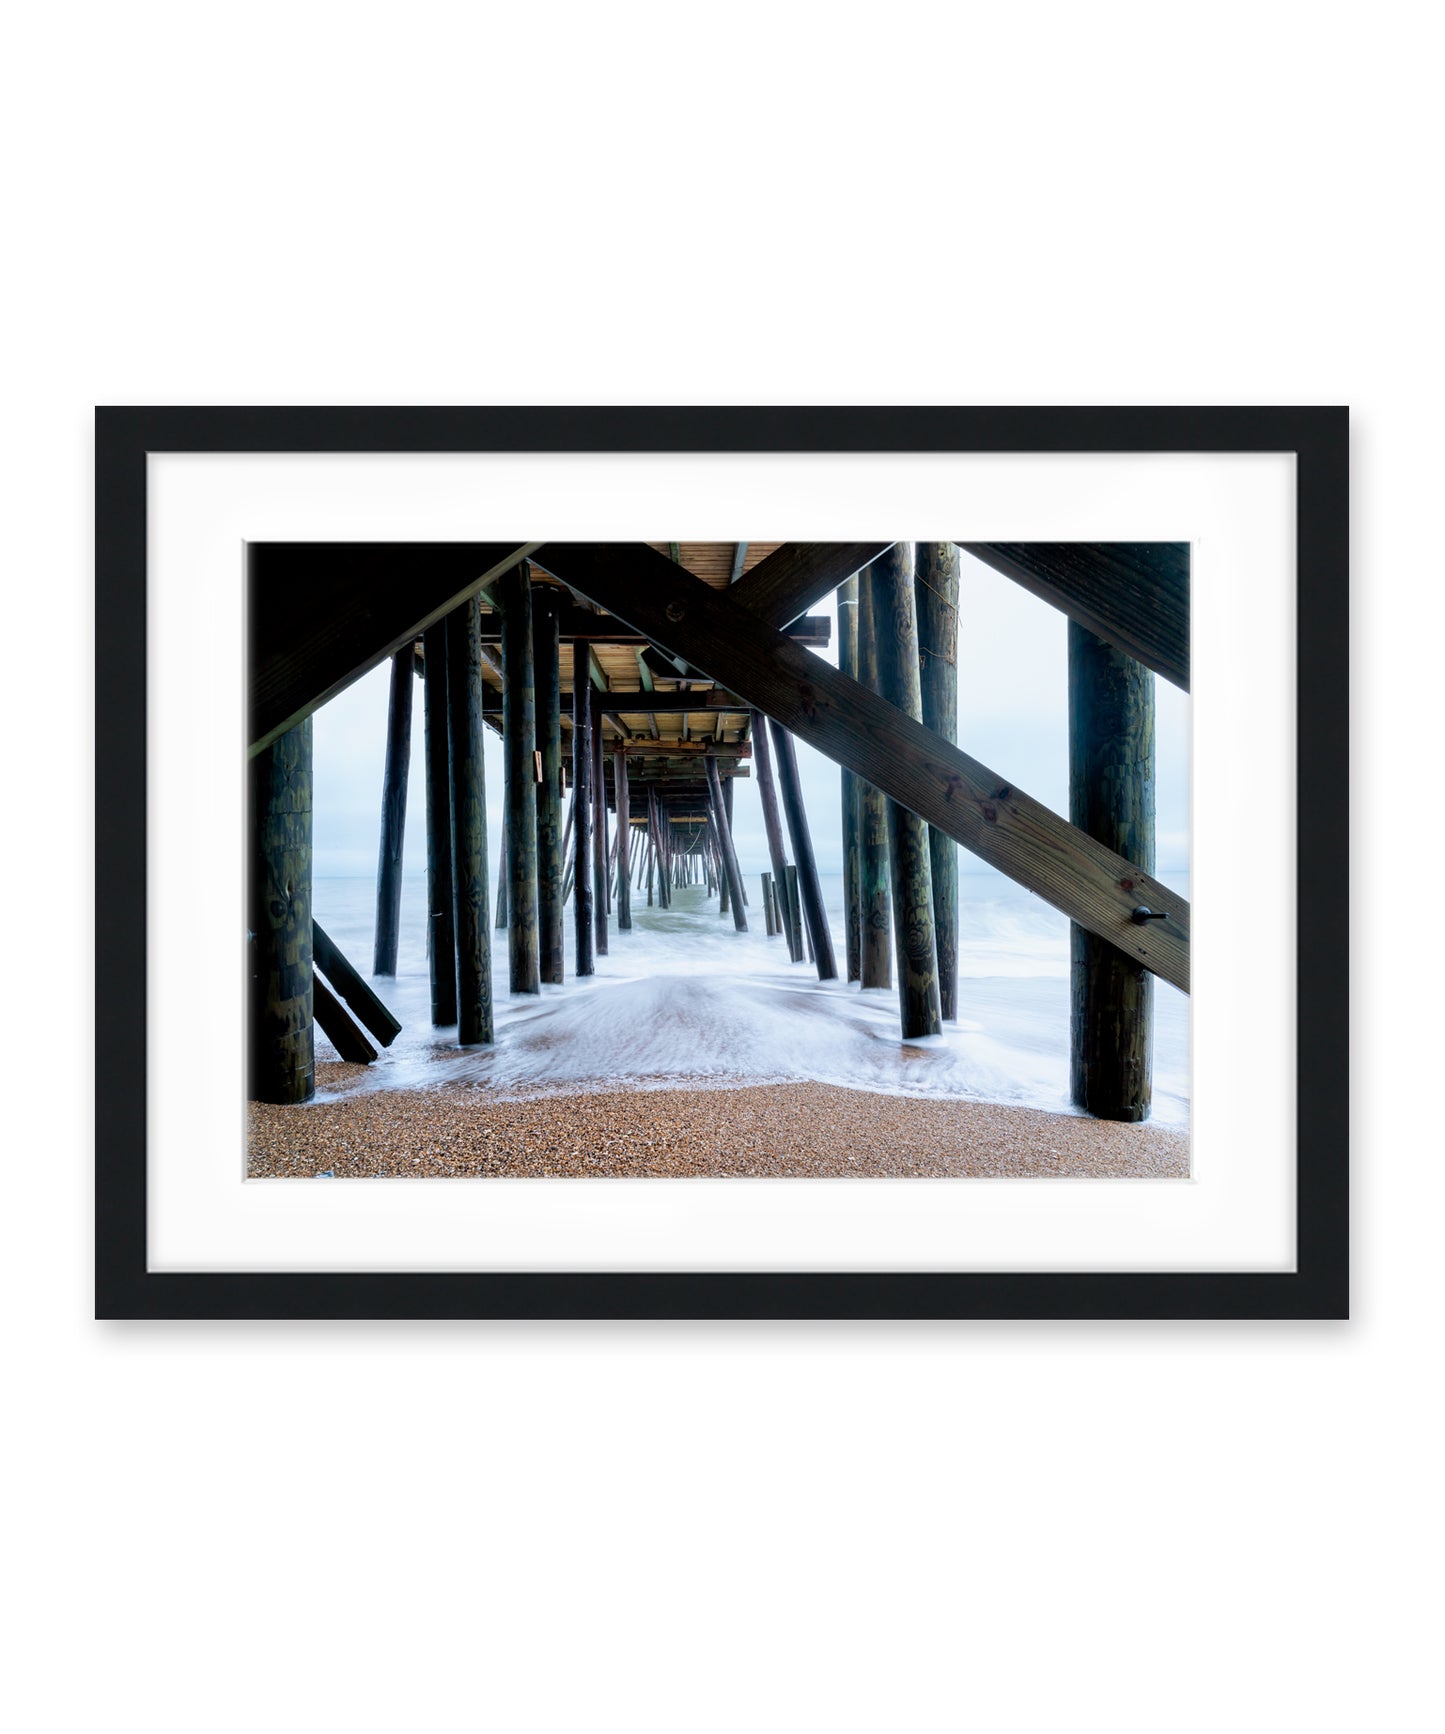 outer banks, avalon pier photograph art print by Wright and Roam, black frame